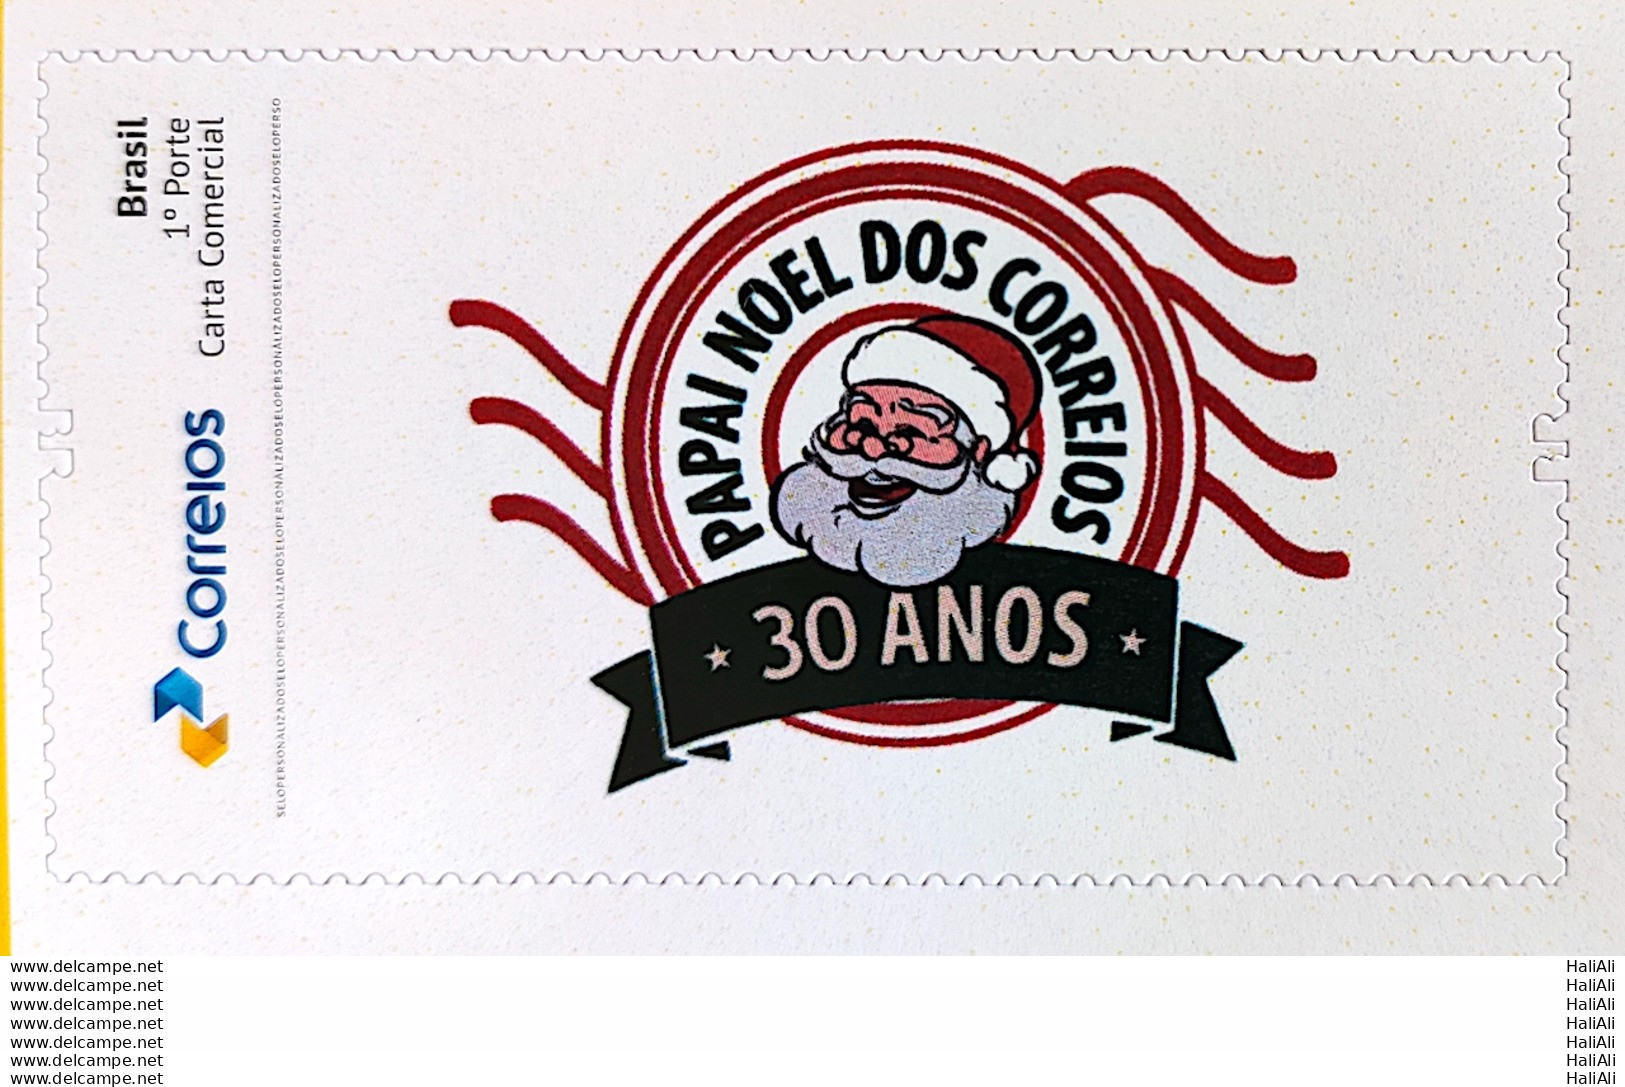 PB 131 Brazil Personalized Stamp Santa Claus Christmas Postal Service Social Action 2019 - Personalisiert